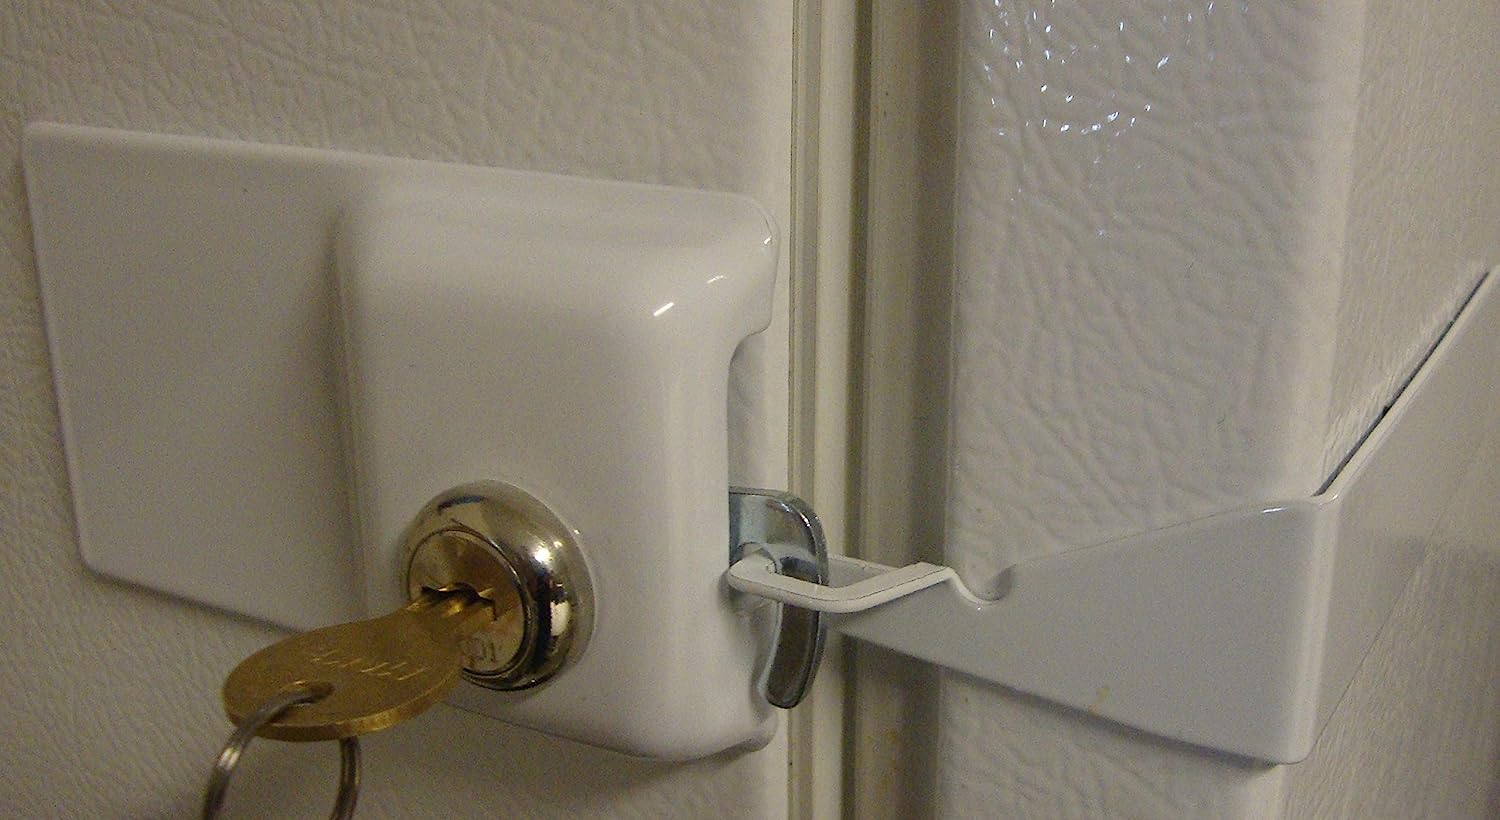 10 Amazing Refrigerator Locks For Adults for 2024